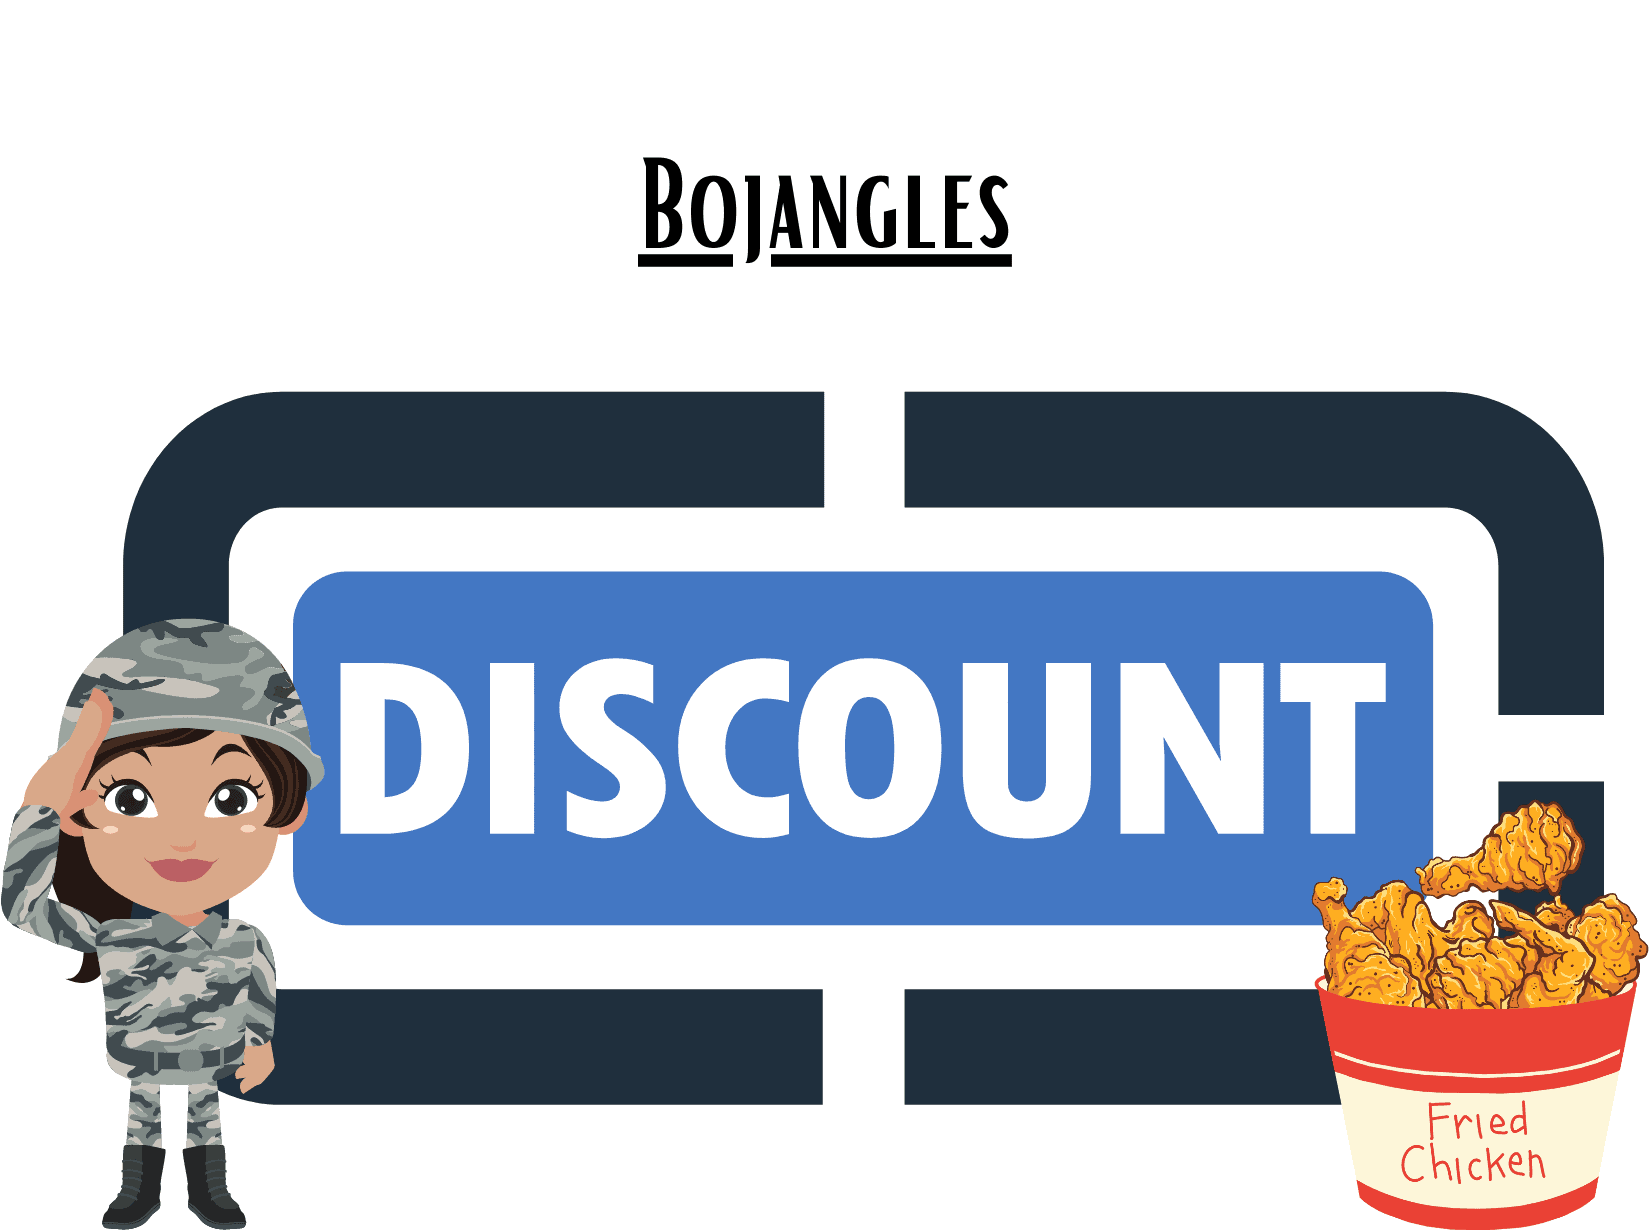 Bojangles Military Discount (Does One Exist?) Wildchildretire